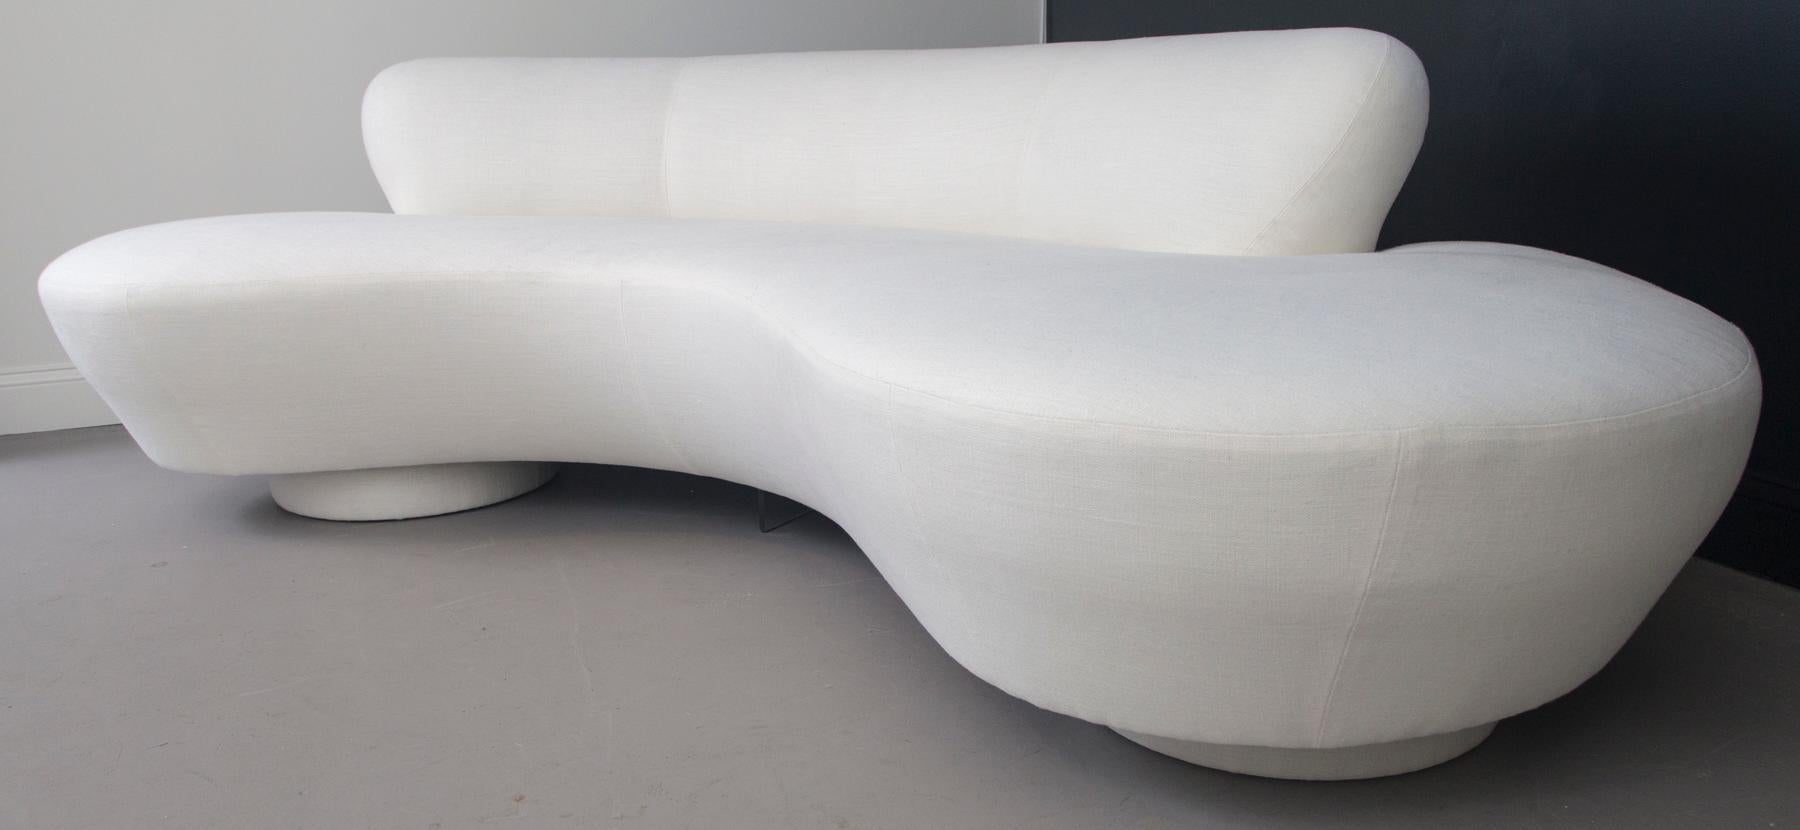 Vladimir Kagan serpentine sofa for Directional. Please note that the sofa has been reupholstered in white linen. Lucite support bracket.